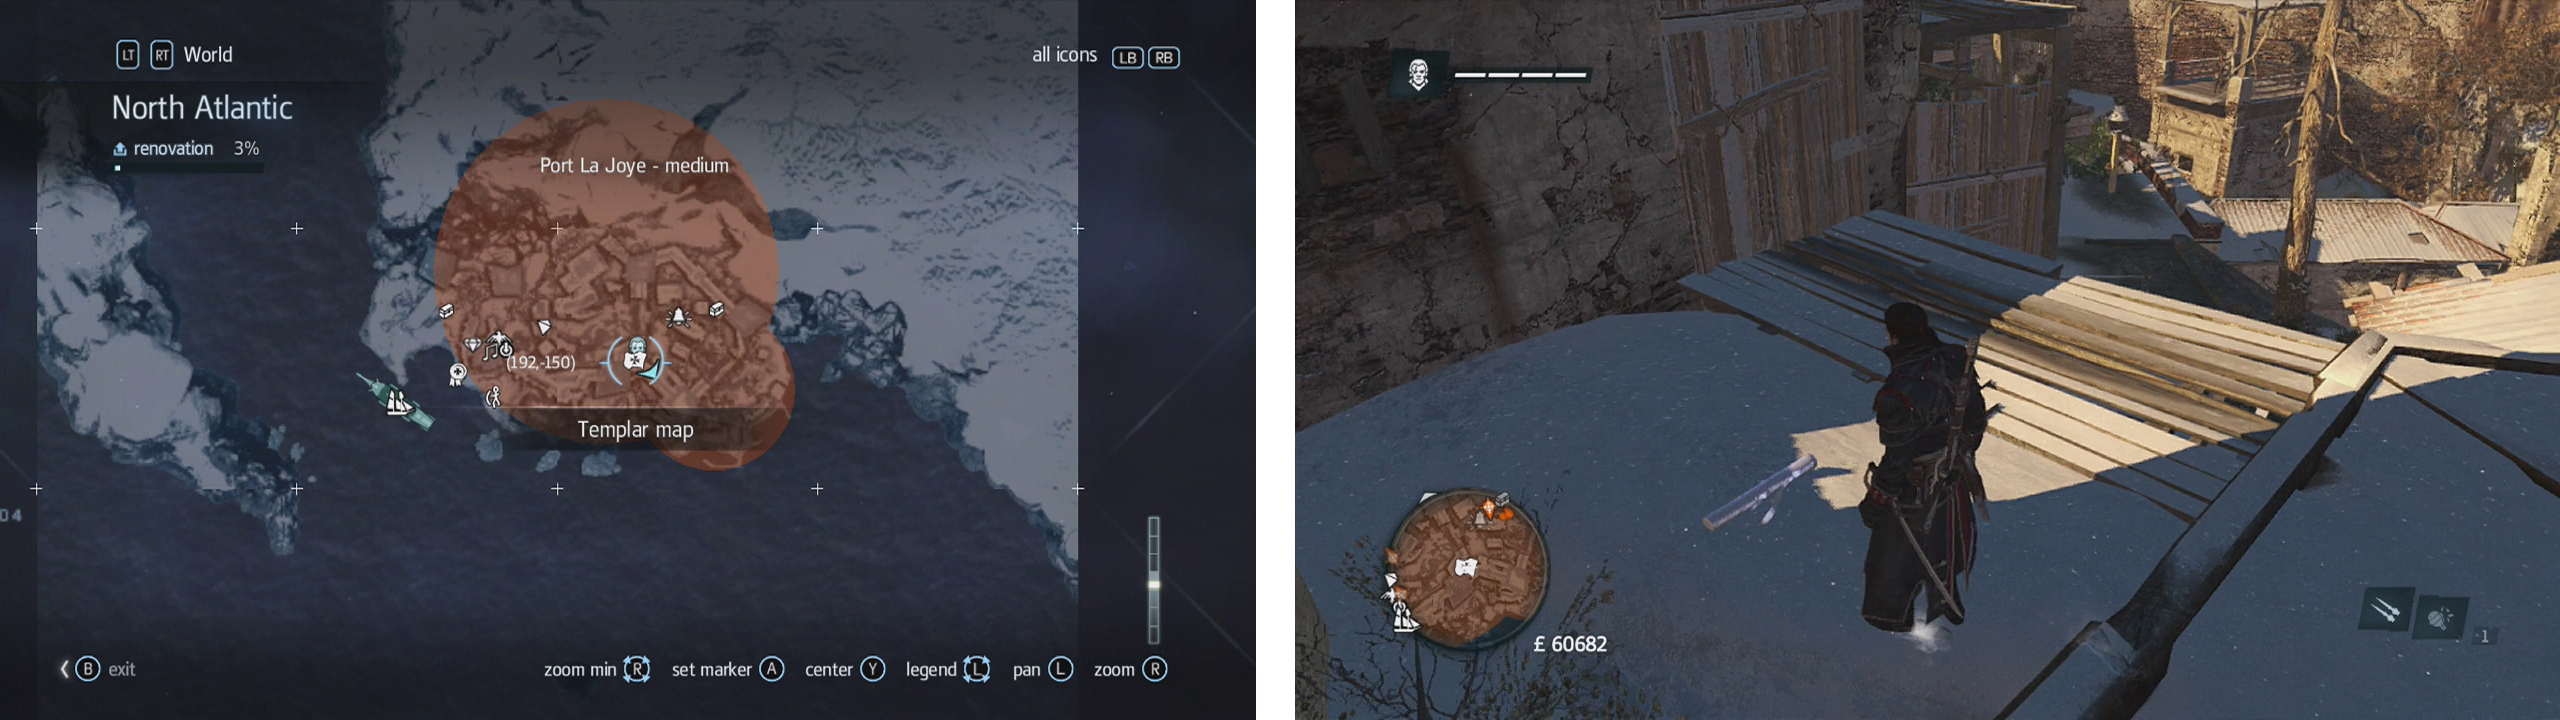 The map icon on the mini-map indicate a templar chart (left). They appear in-game as a rolled up map (right).